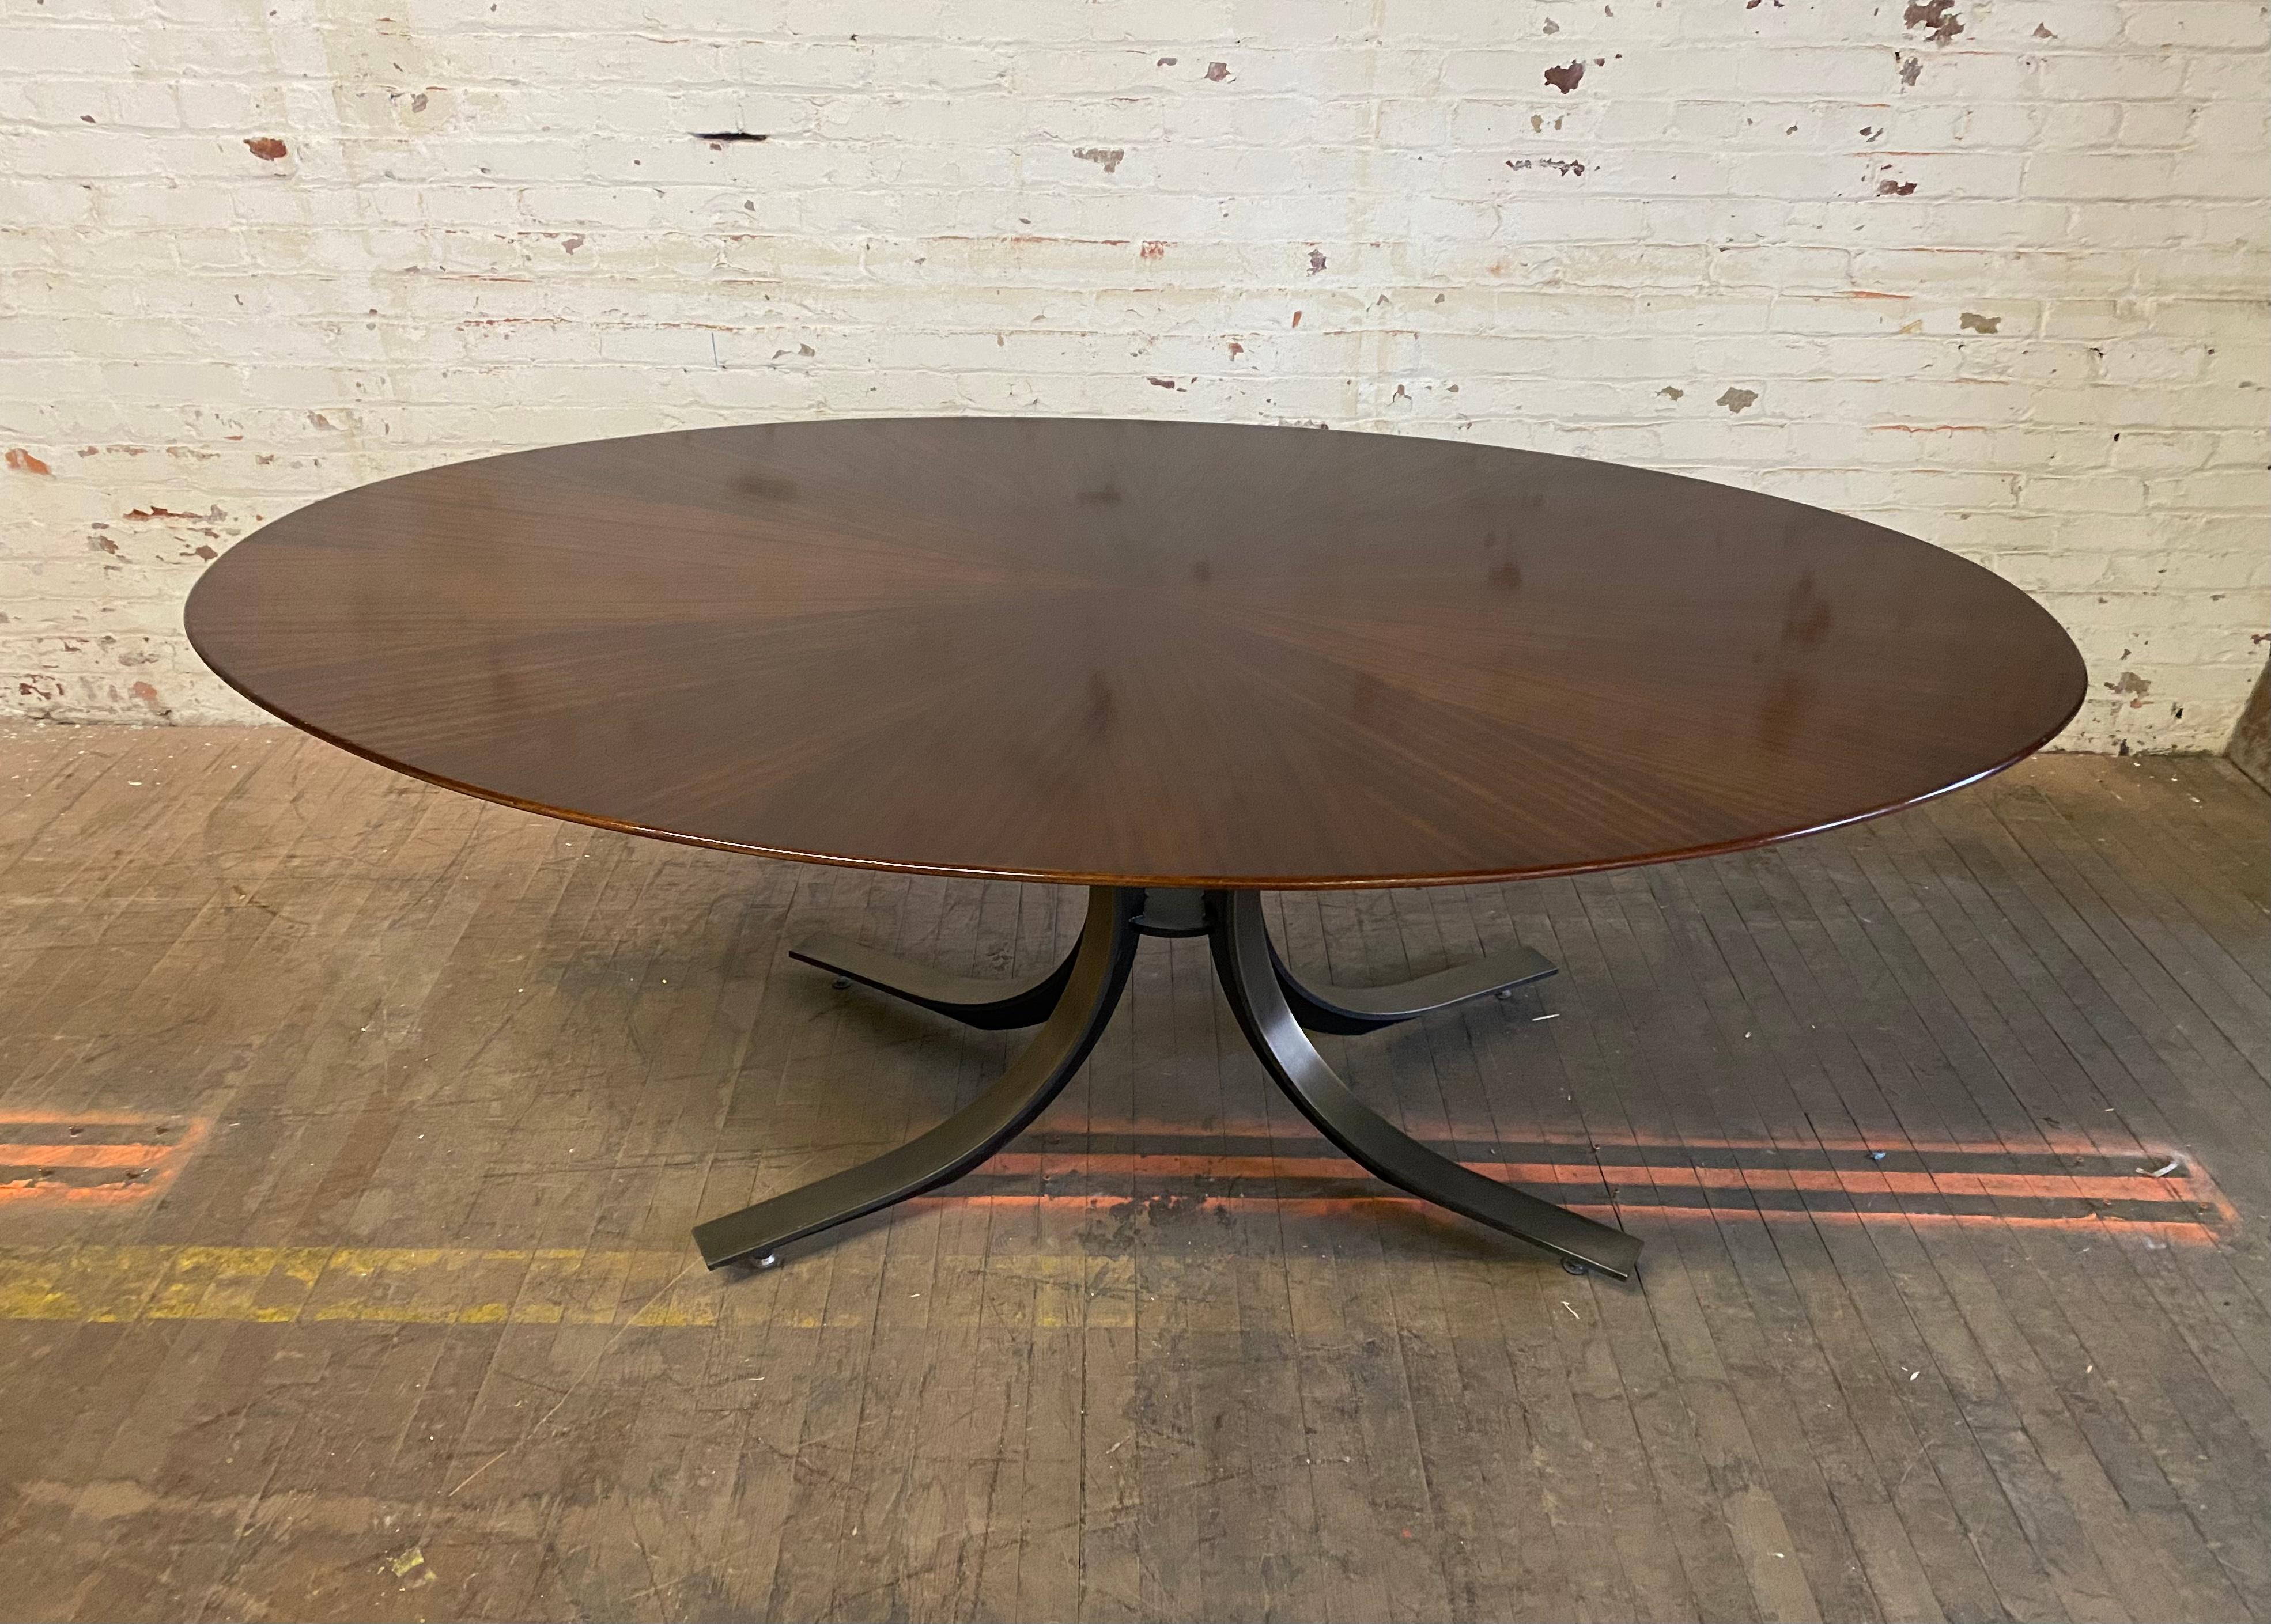 Osvaldo Borsani walnut & bronzed steel oval dining table, c. 1970,,, aMAZING starburst wood veneers,, Pictures do no justice,, Also retains wonderful bronzed tone steel base,, Hand delivery avail to New York City or anywhere en route from Buffalo NY.